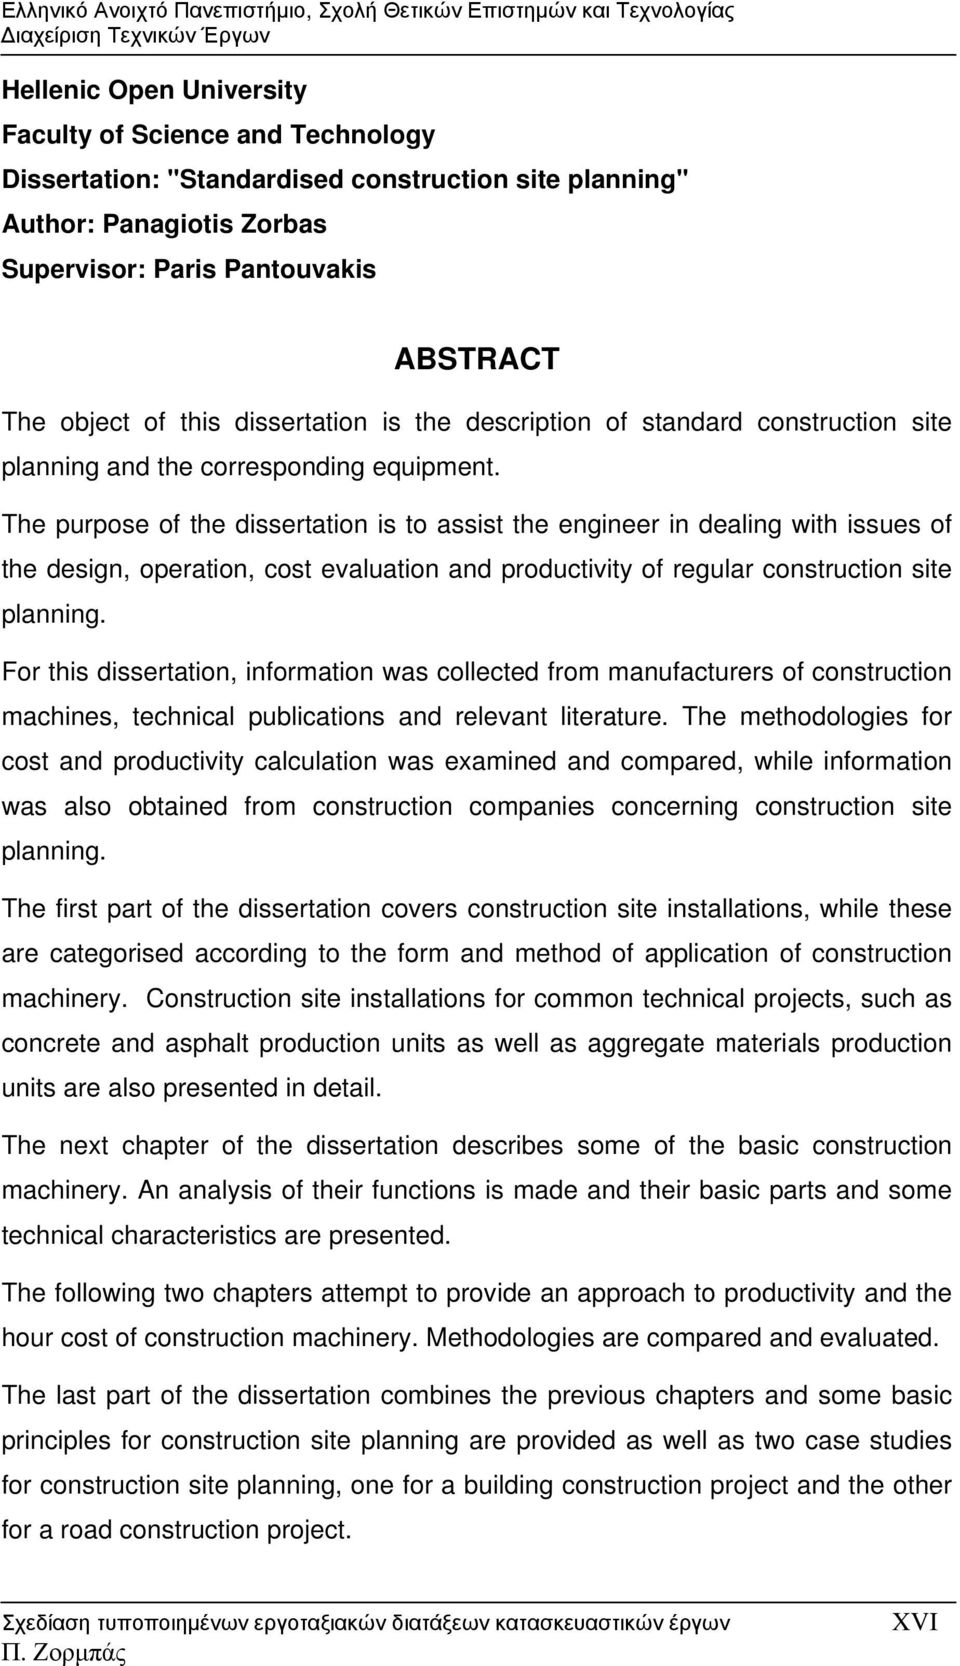 The purpose of the dissertation is to assist the engineer in dealing with issues of the design, operation, cost evaluation and productivity of regular construction site planning.